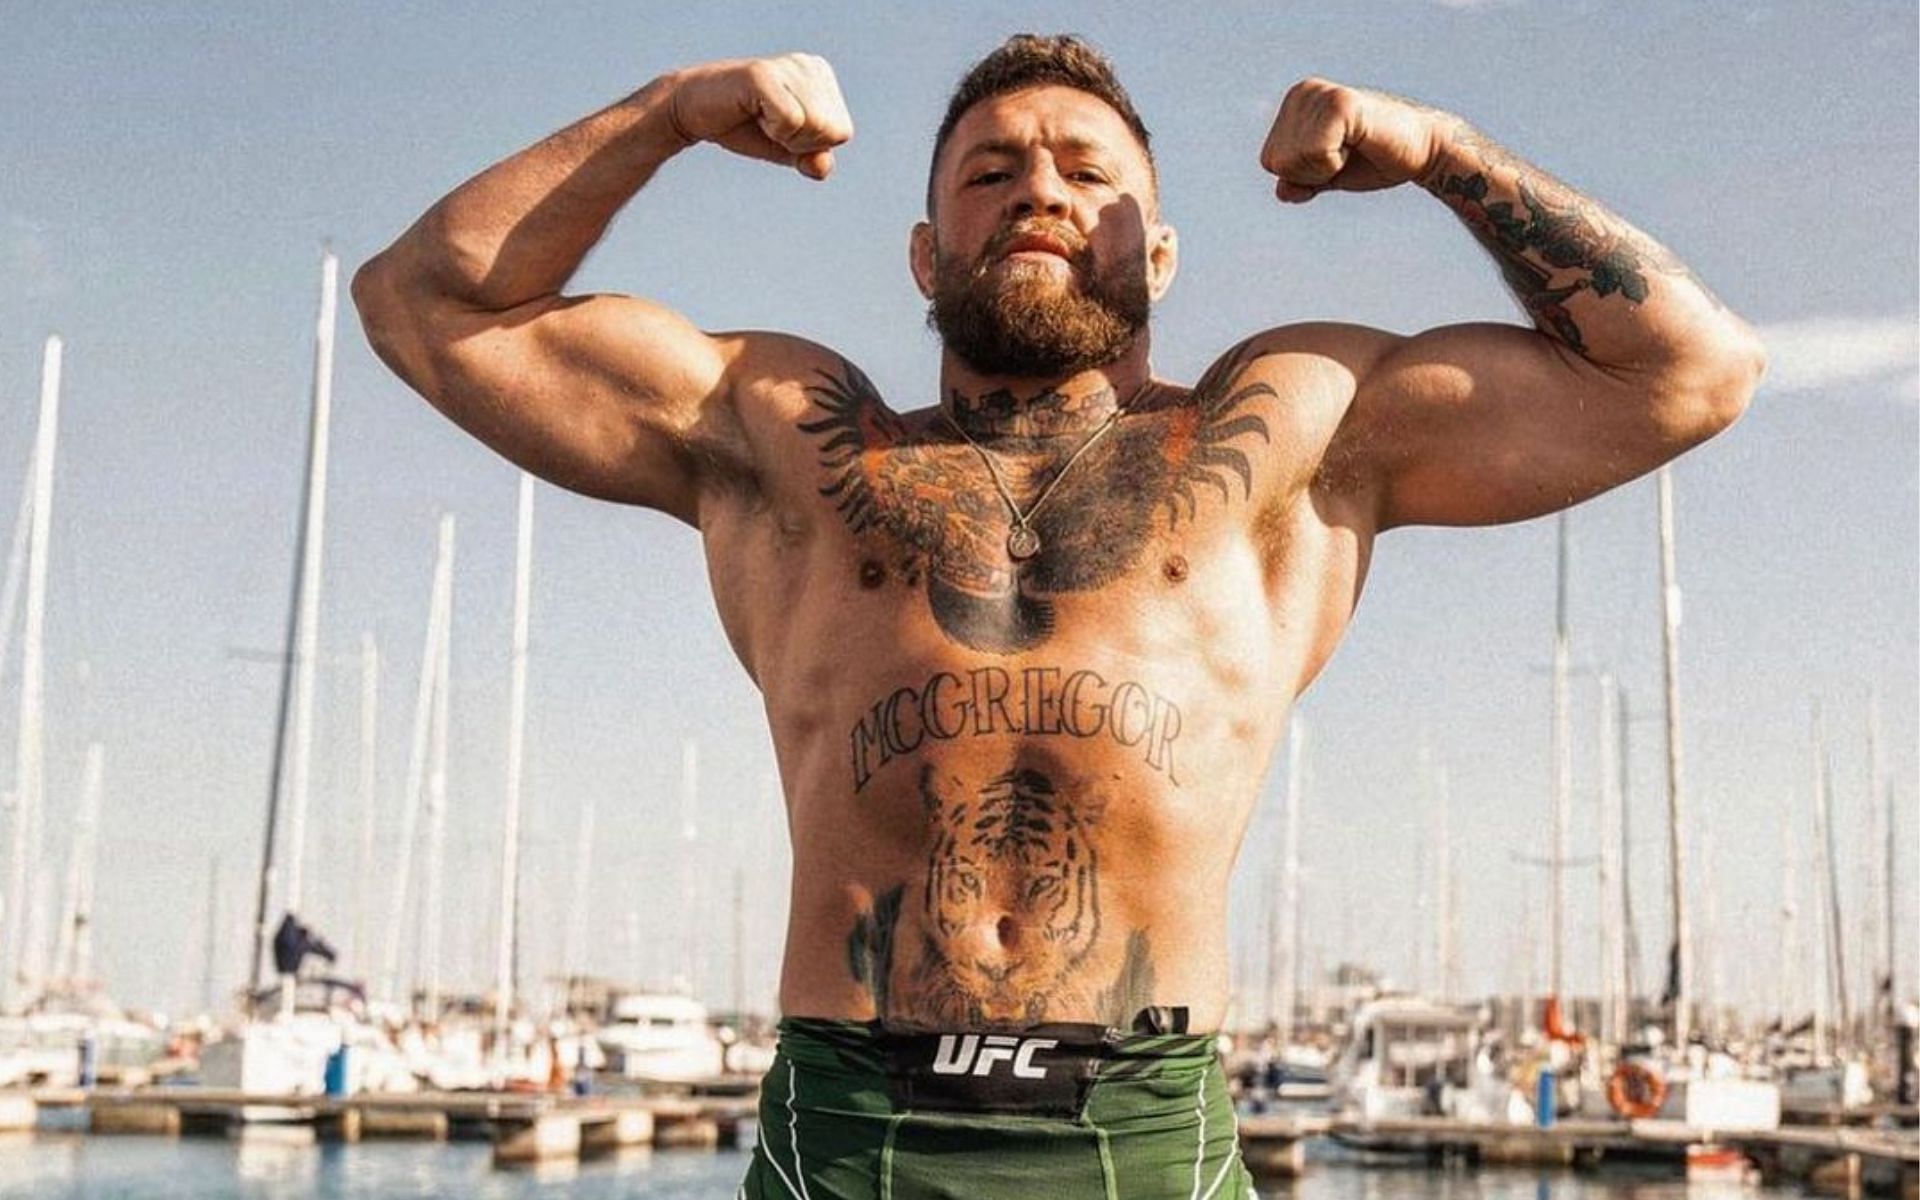 Conor McGregor presenting his current physique [Image Courtesy: @thenotoriousmma on Instagram]